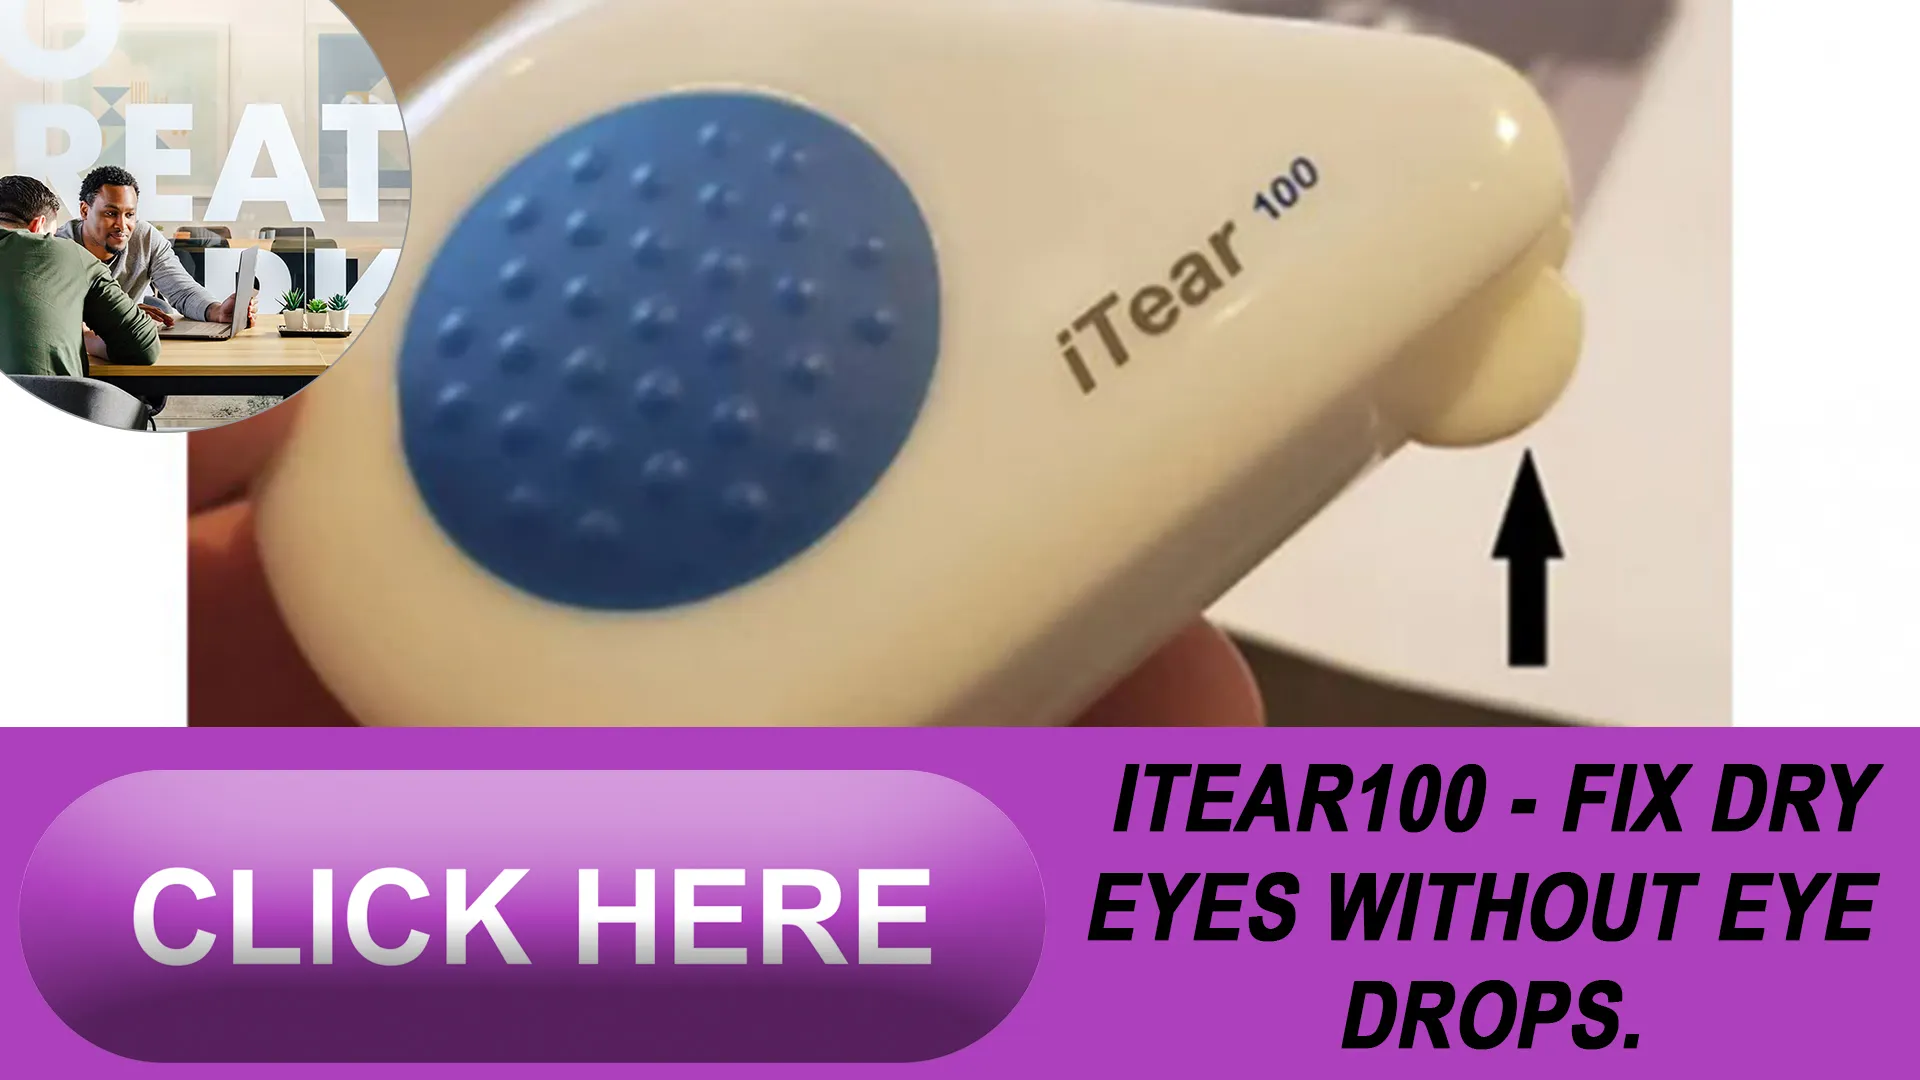 Experience the Breakthrough in Eye Care with iTEAR100